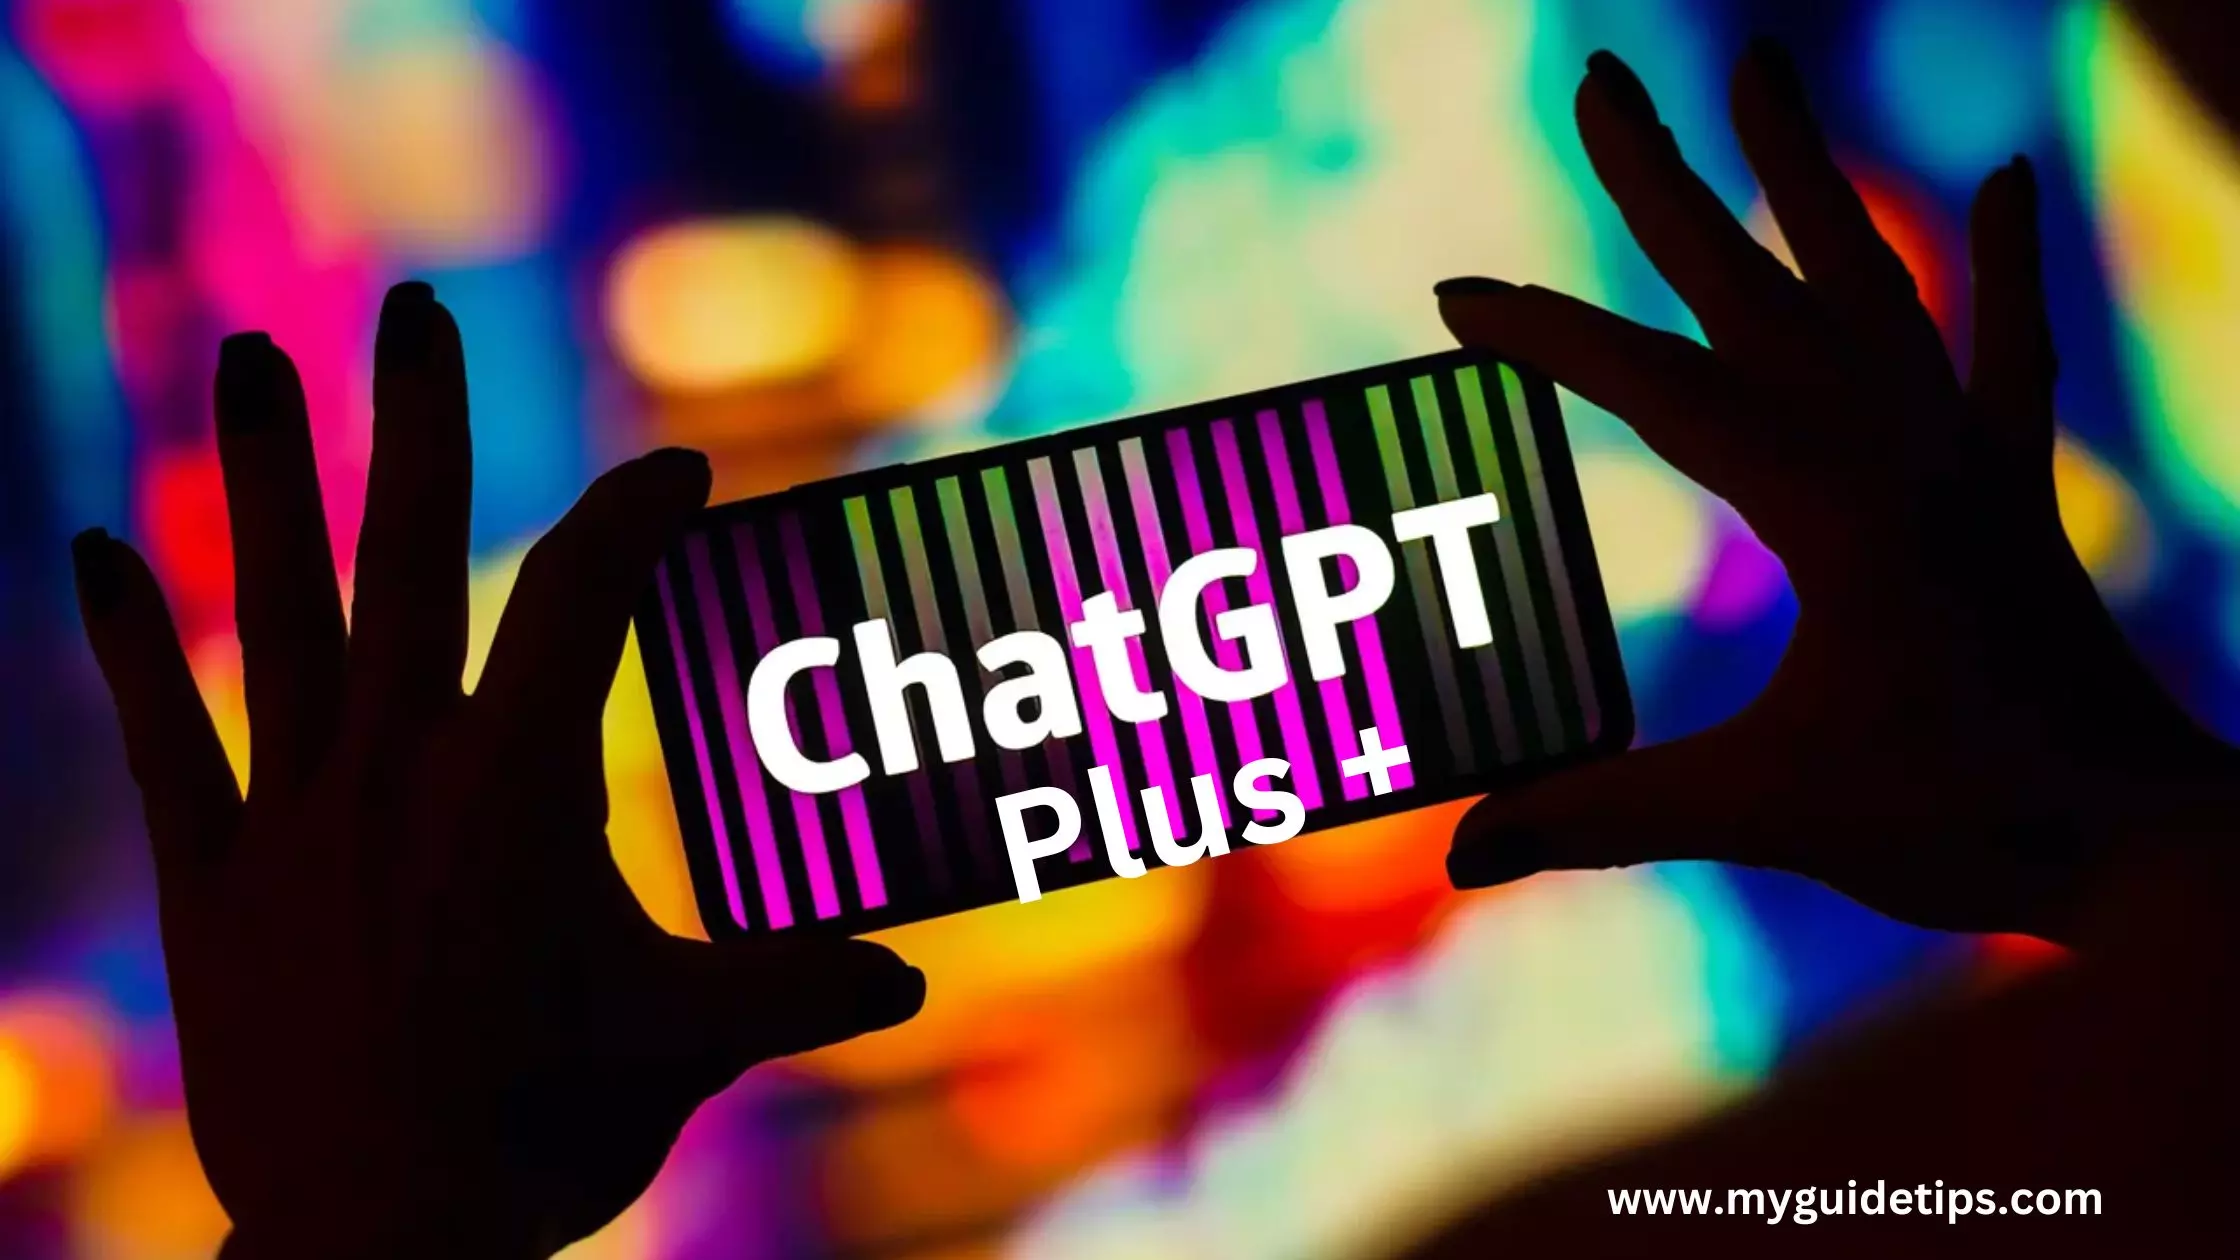 chatgpt plus has been rolled out